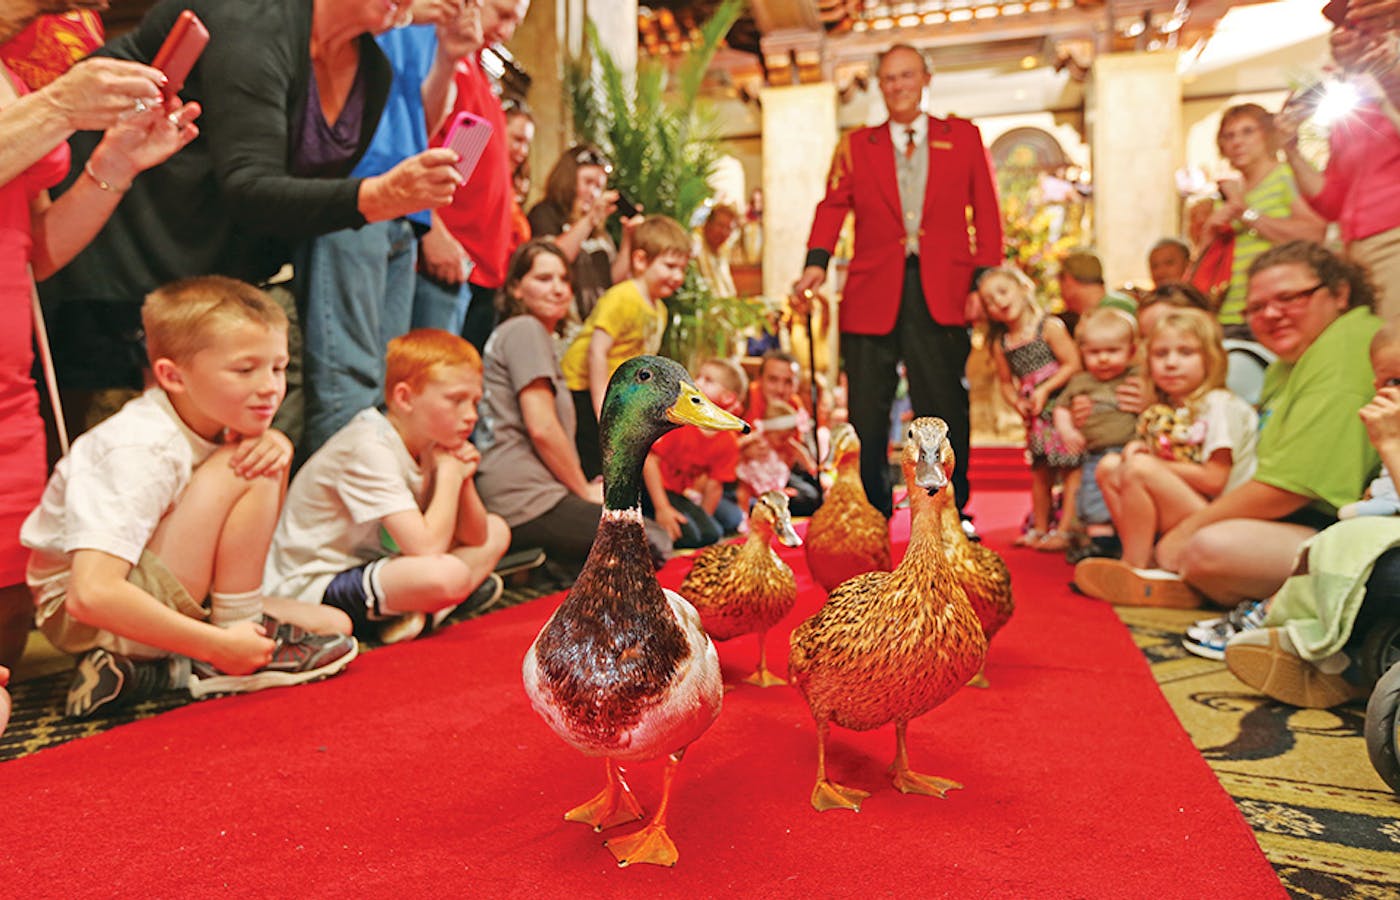 Families at the duck parade at The Peabody hotel in Memphis, Tennessee (photo courtesy of Memphis Convention & Visitors Bureau)